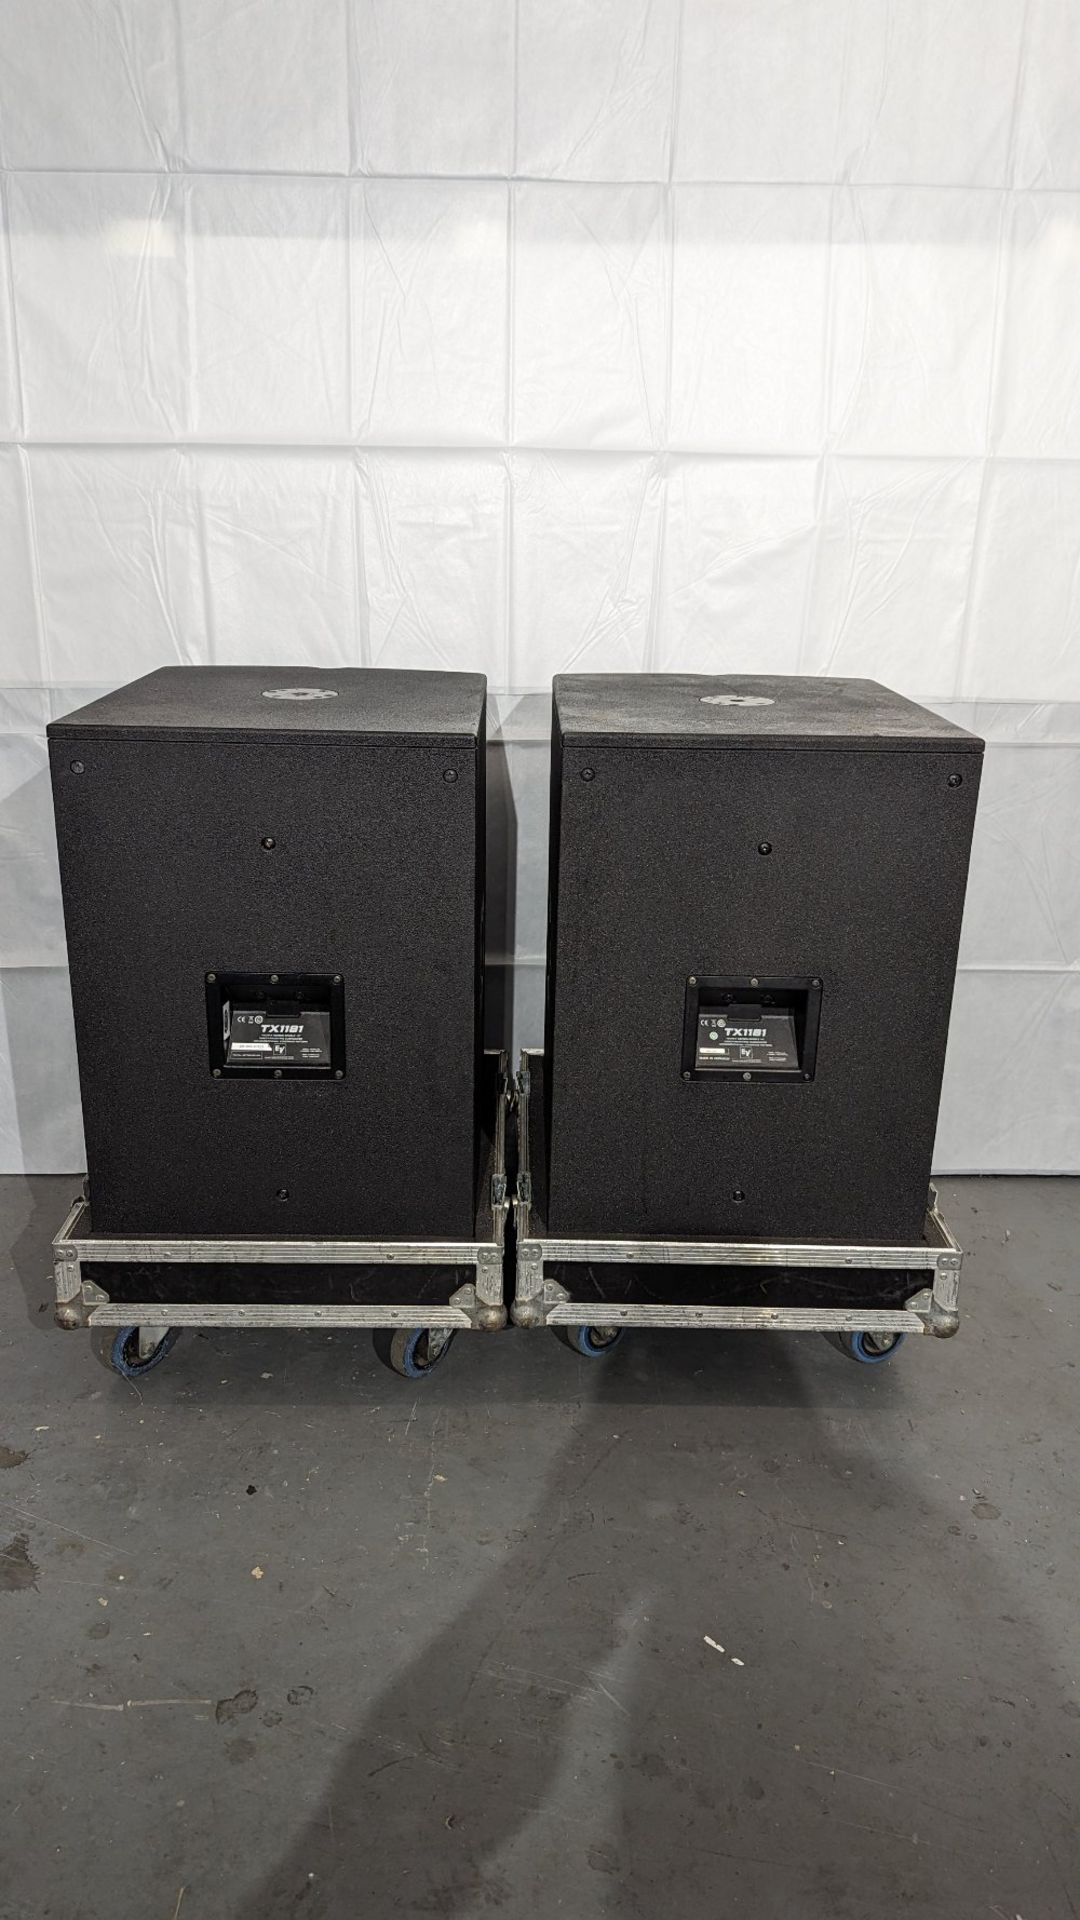 Electro-Voice PA Sound System - (4) TX1152 Speakers, (2) TX1181 Subs & Associated Equipment - Image 8 of 14